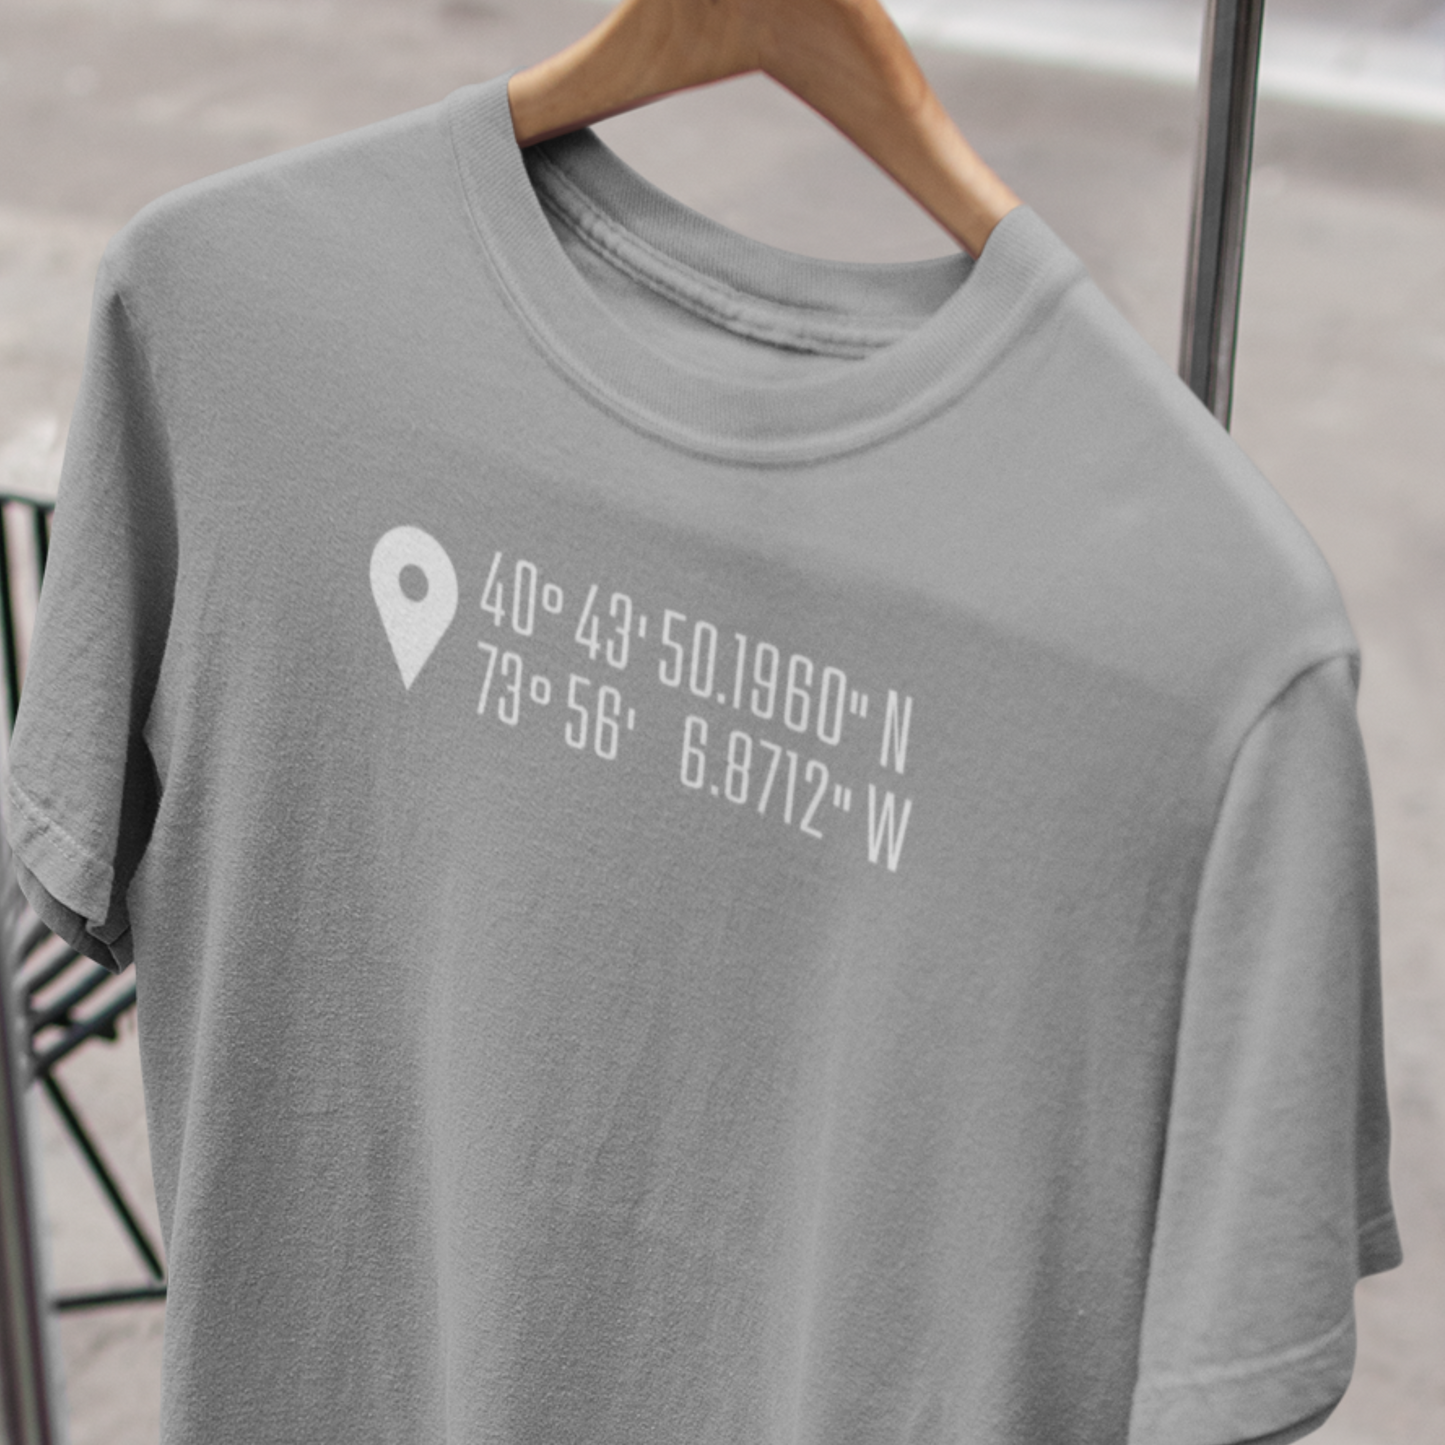 Coordinates Shirt, Special Location, Favourite Place, Loc Lat, Where We Met, Wedding, Anniversary, Travel Gift, T-Shirt